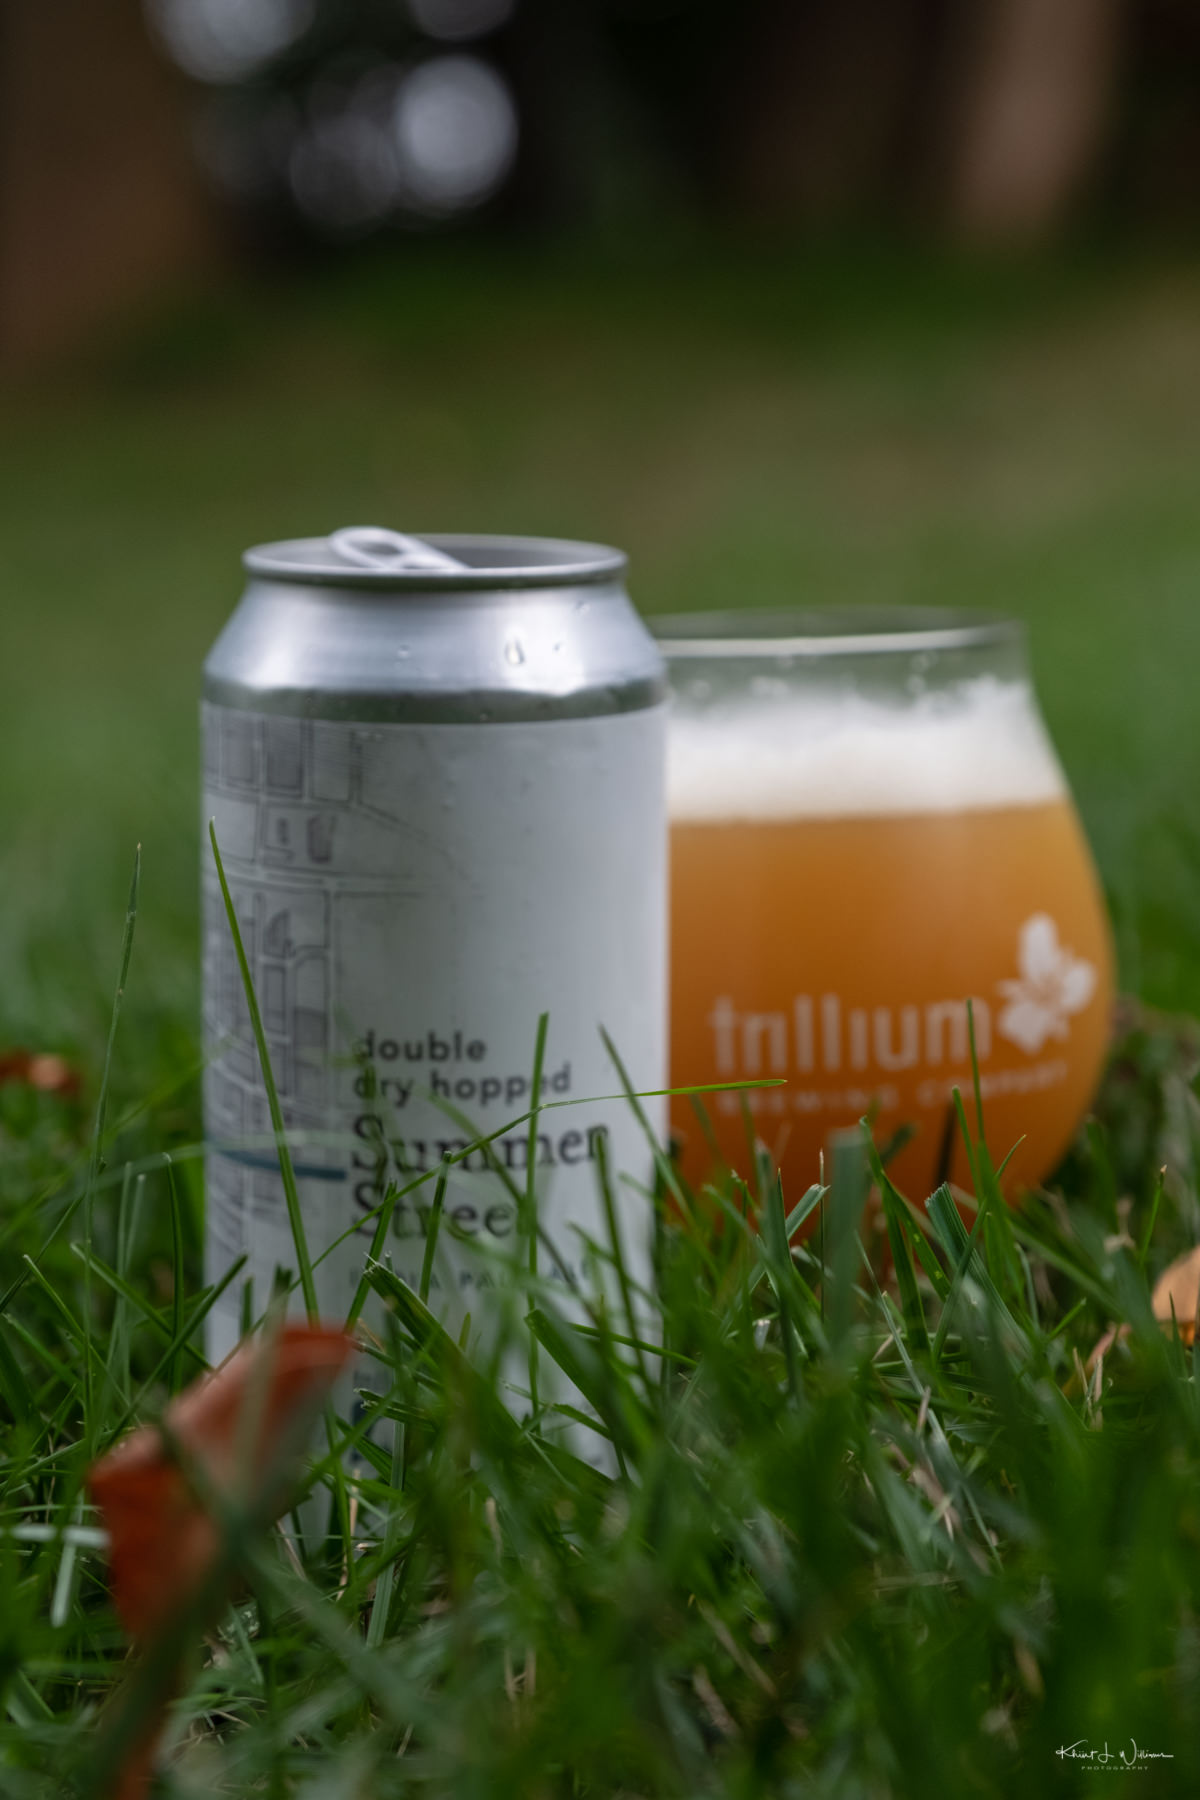 Trillium Brewing Company's Double Dry Hopped Summer Street